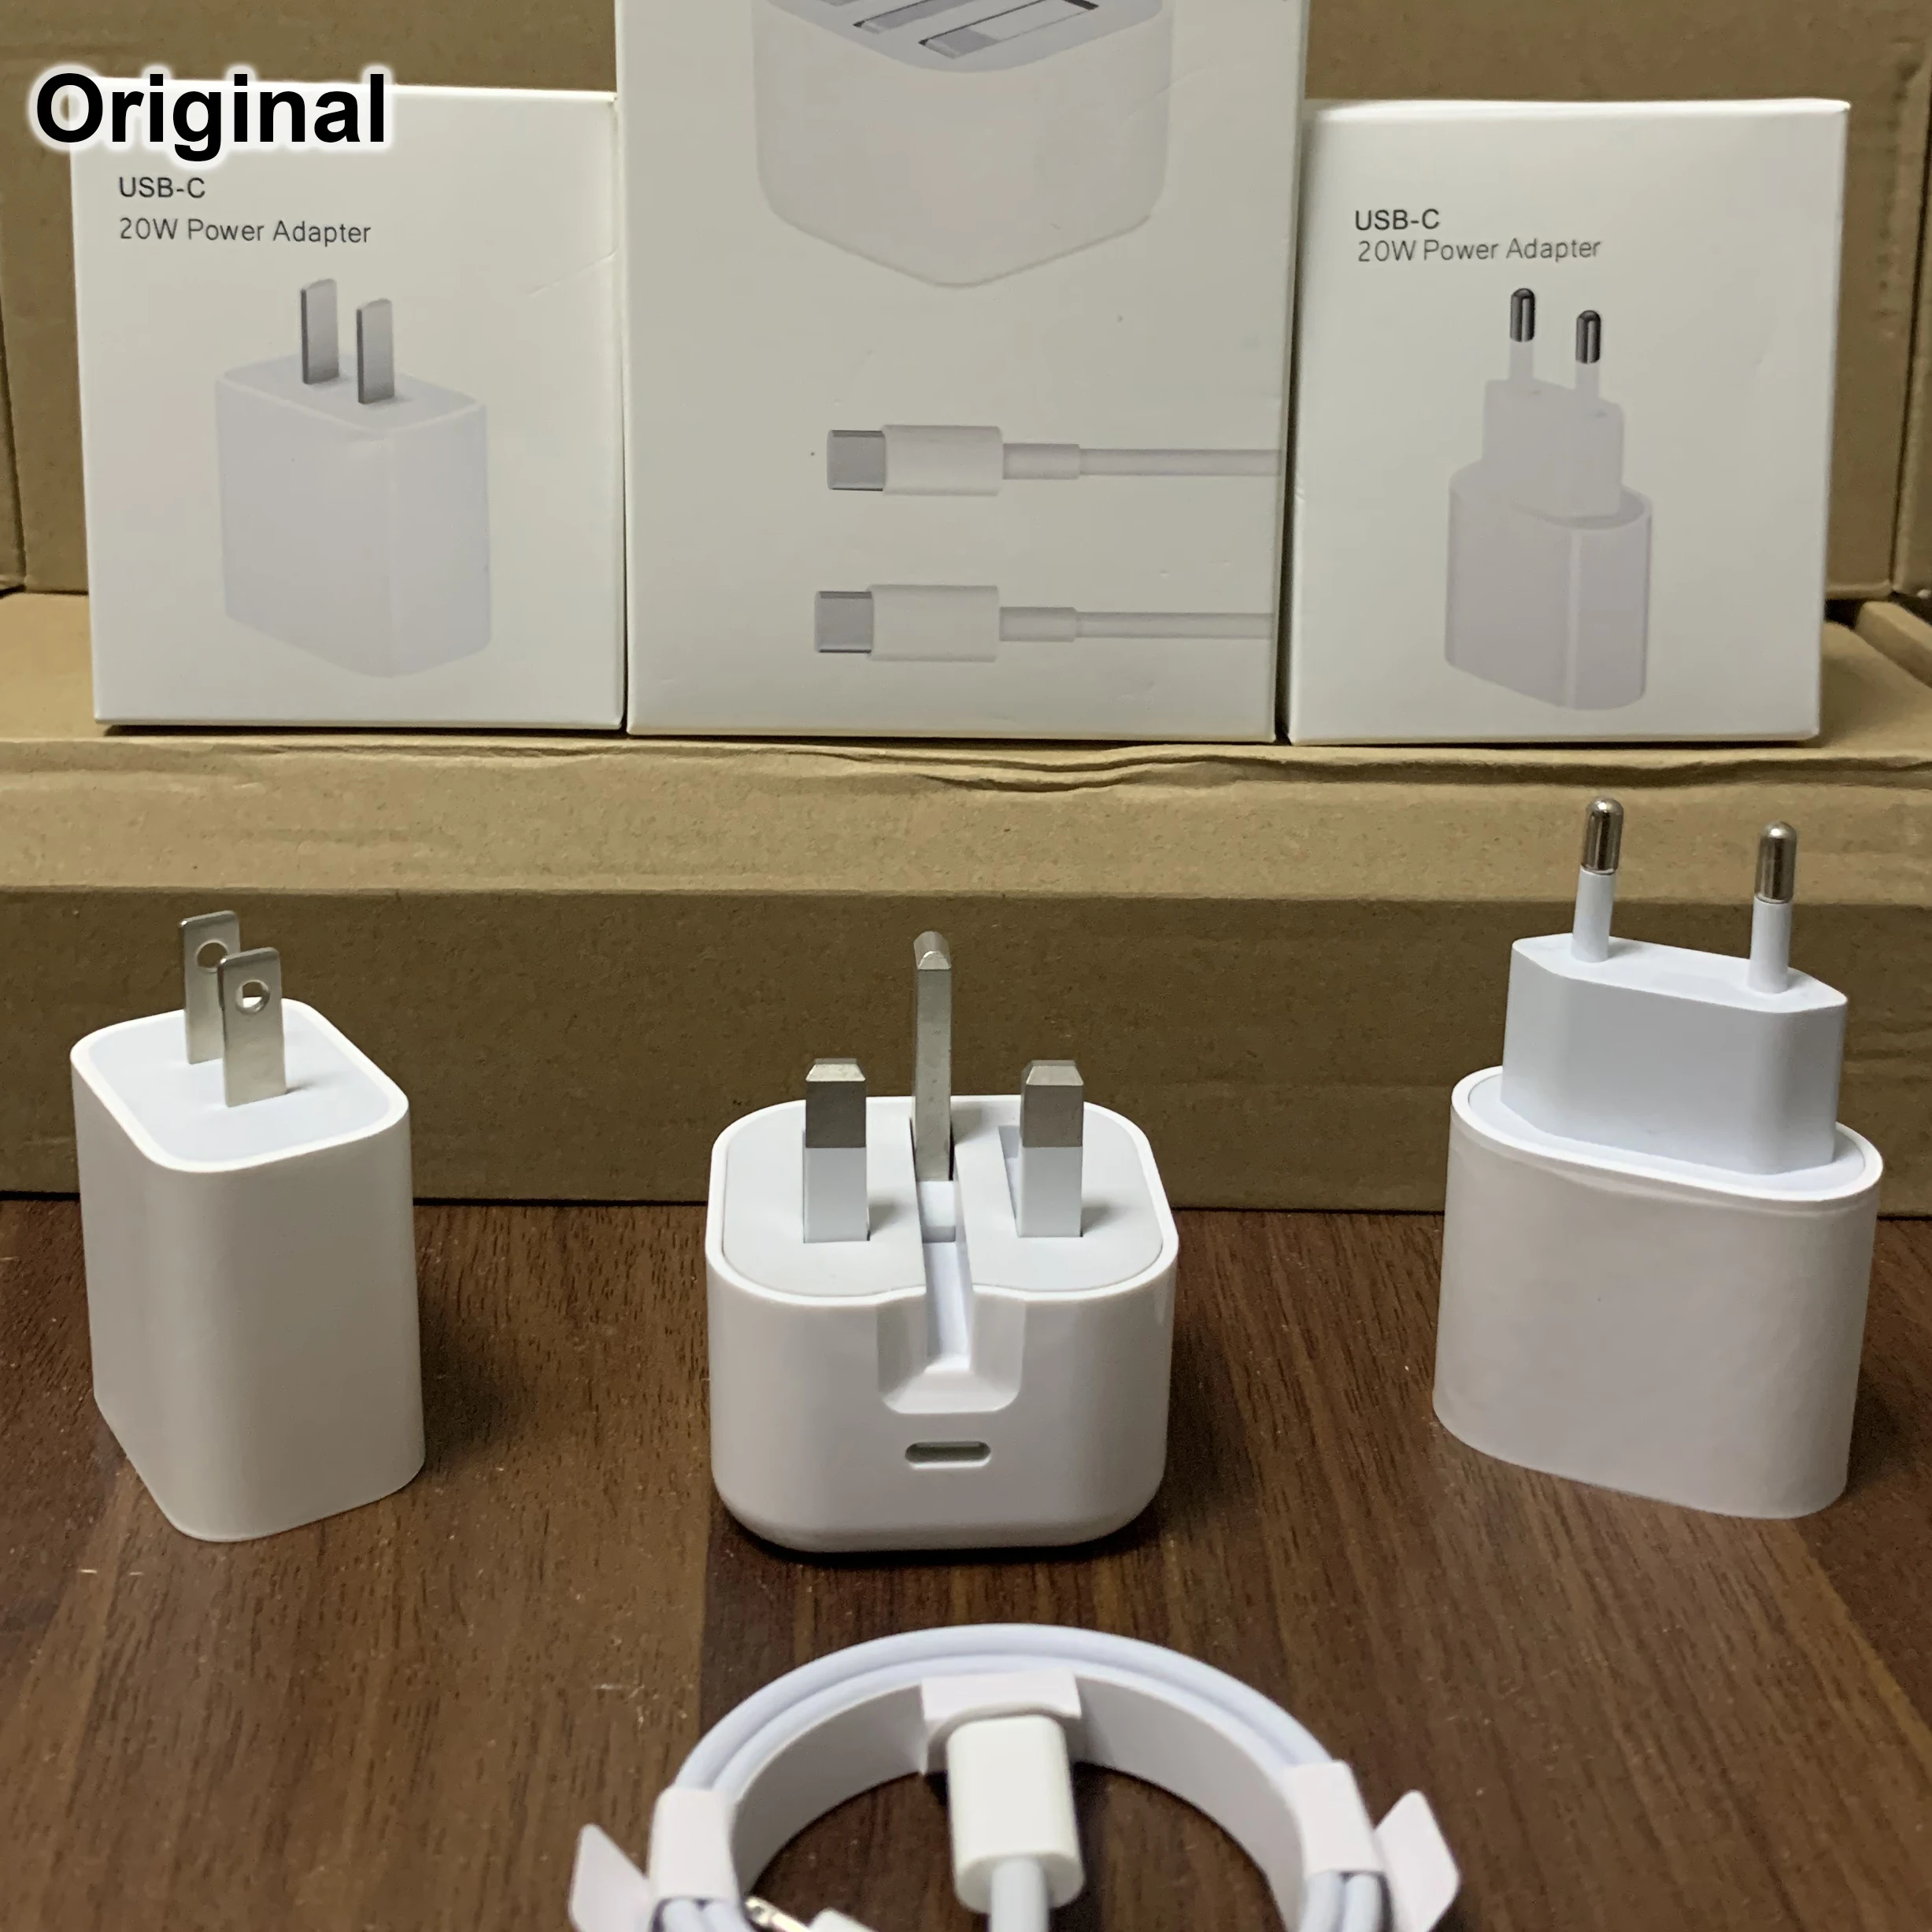 EU UK US Universal 20W Power PD Fast USB C Power Adapter Wall Charger C94 18W USB-C Type C Cable For iPhone X 11 12 pro From m.alibaba.com